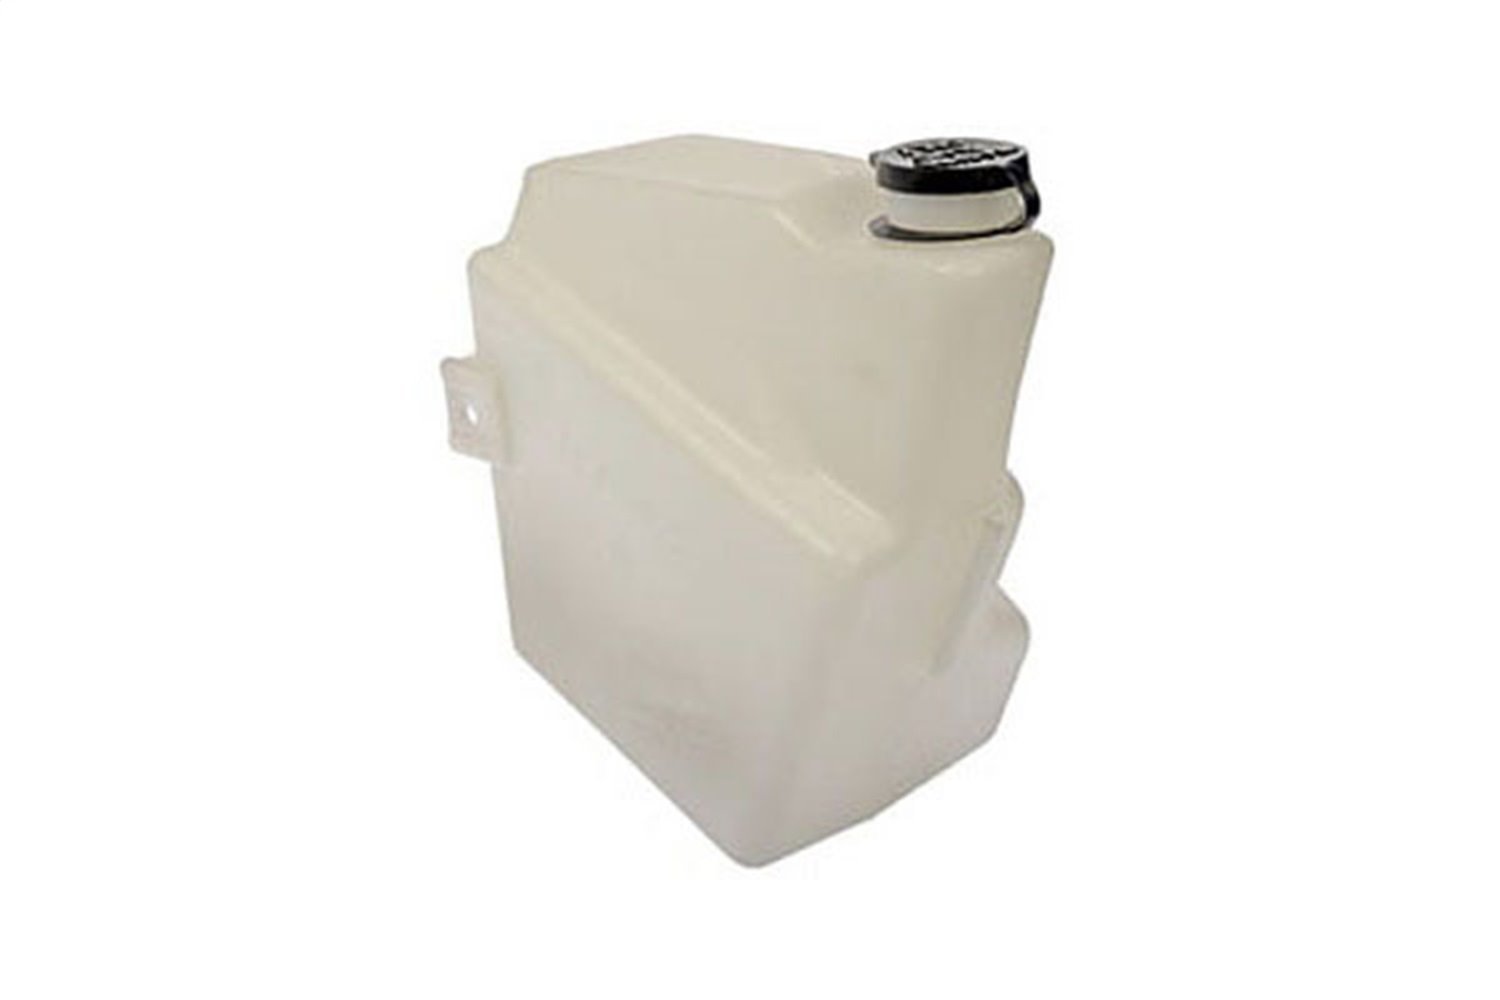 This windshield wiper fluid reservoir from Omix-ADA For Use with Dual Pumps on 94-95 Jeep Wrangler.